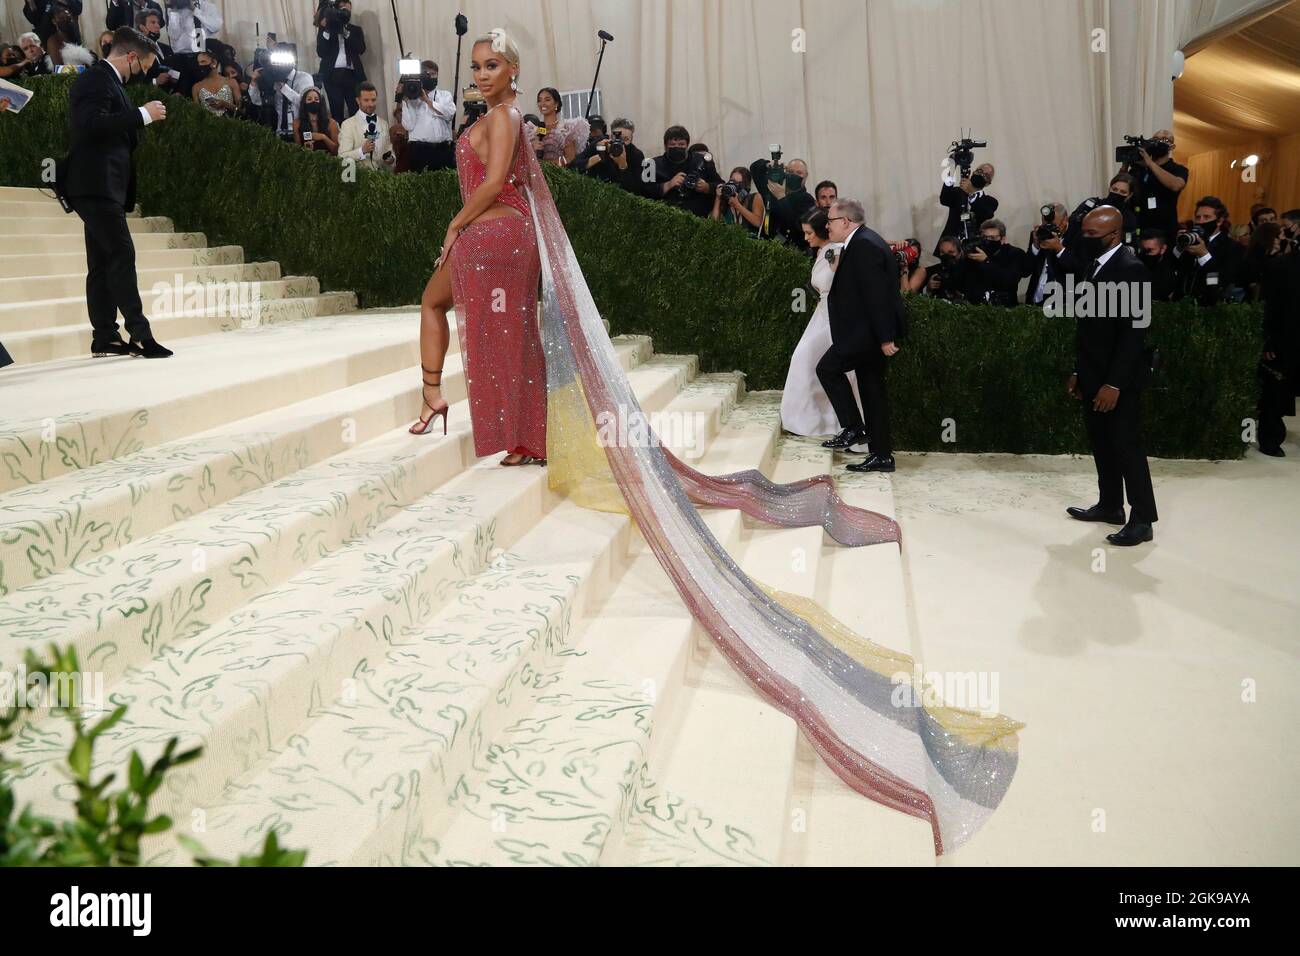 Metropolitan Museum of Art Costume Institute Gala - Met Gala - In America: A Lexicon of Fashion - Arrivals - New York City, U.S. - September 13, 2021. Saweetie. REUTERS/Mario Anzuoni Stock Photo